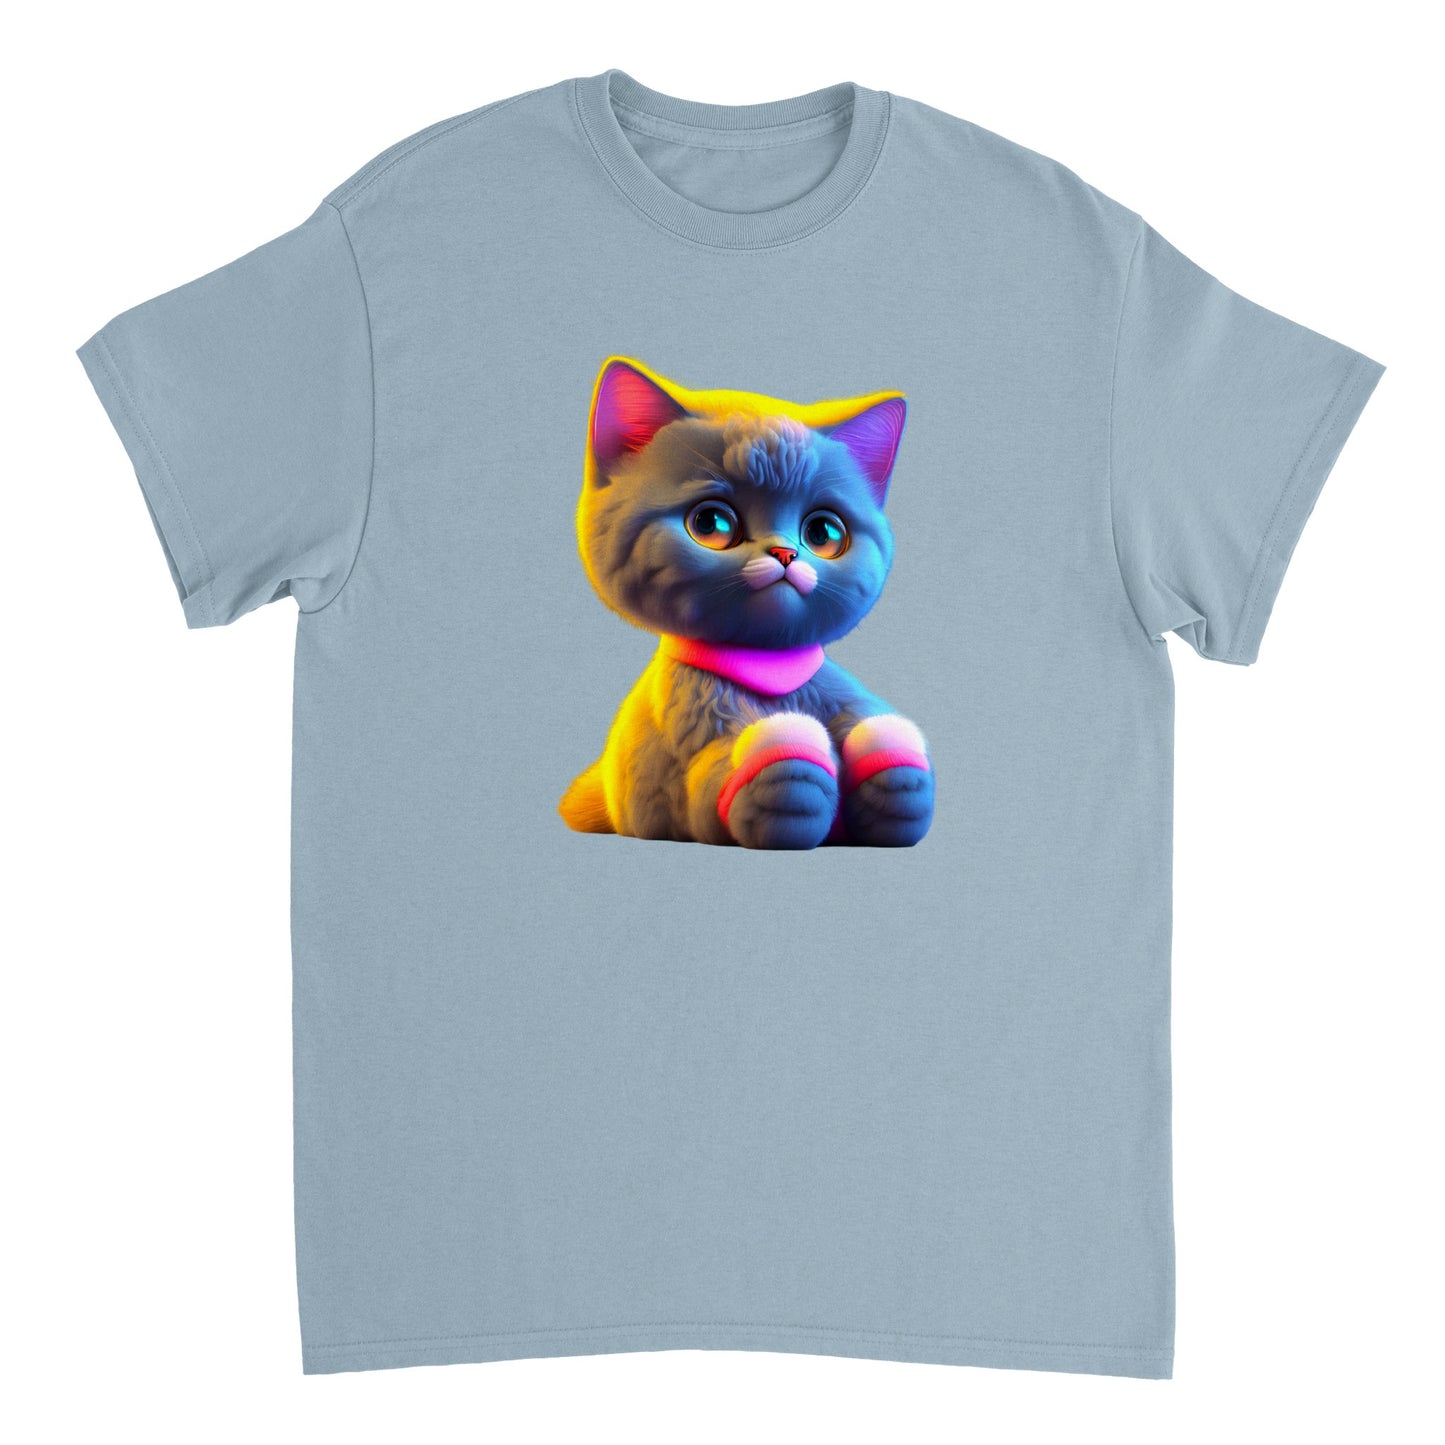 Adorable, Cool, Cute Cats and Kittens Toy - Heavyweight Unisex Crewneck T-shirt 39